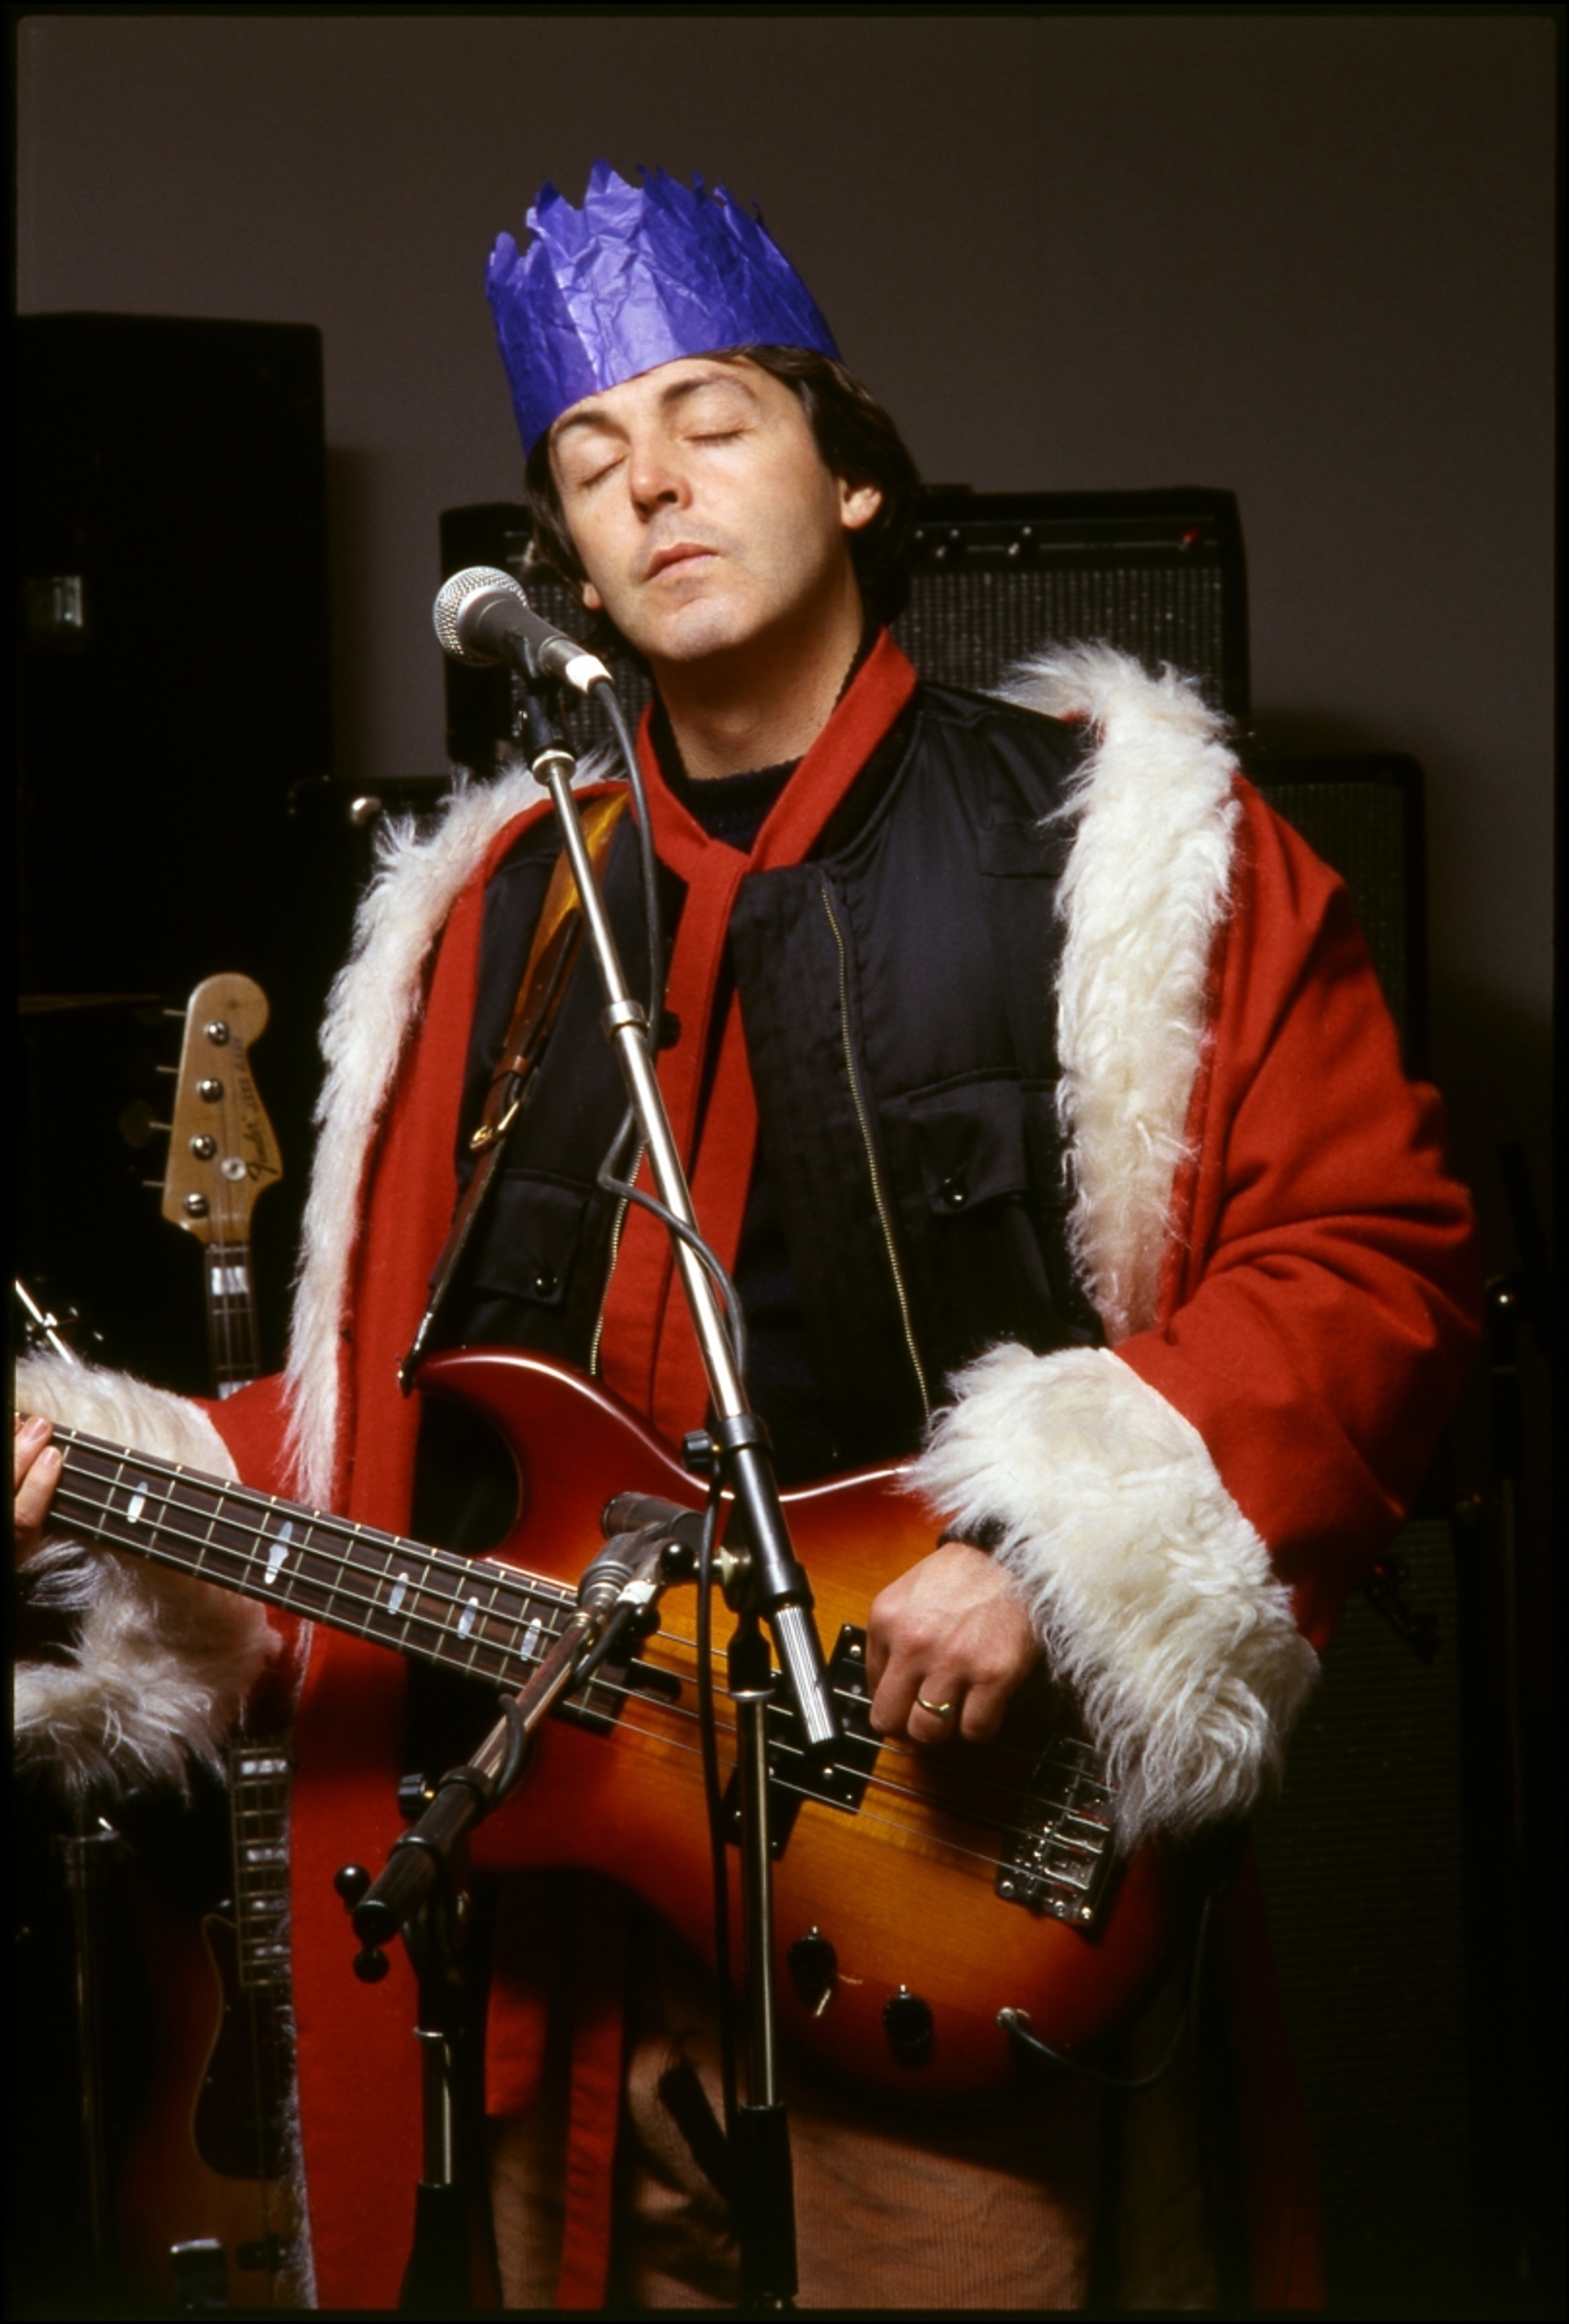 Photo of Paul performing in a Christmas hat and Santa coat.